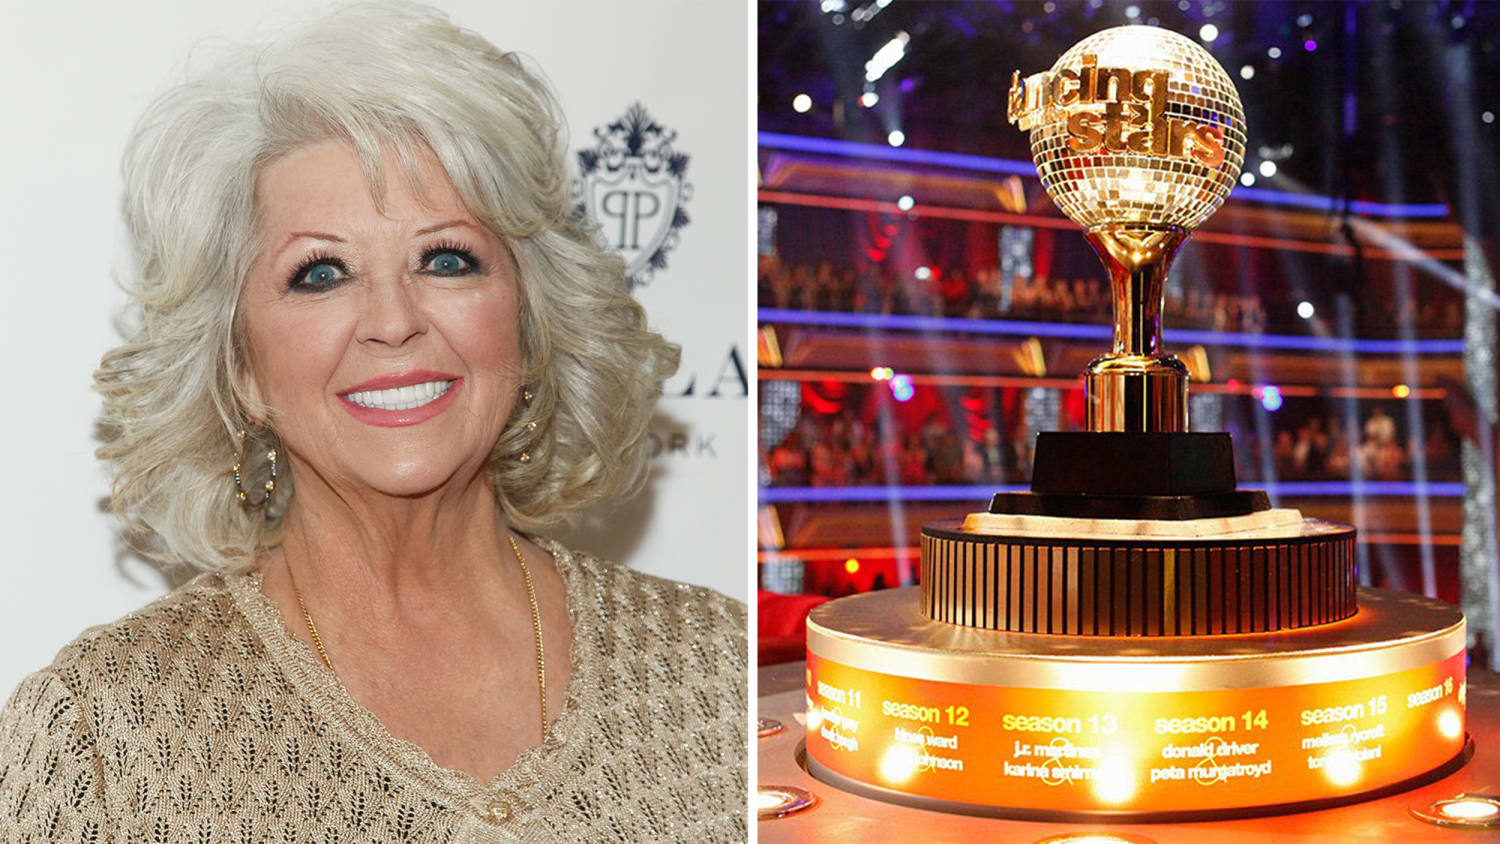 Paula Deen joins new season of 'Dancing With the Stars' cast - TODAY.com